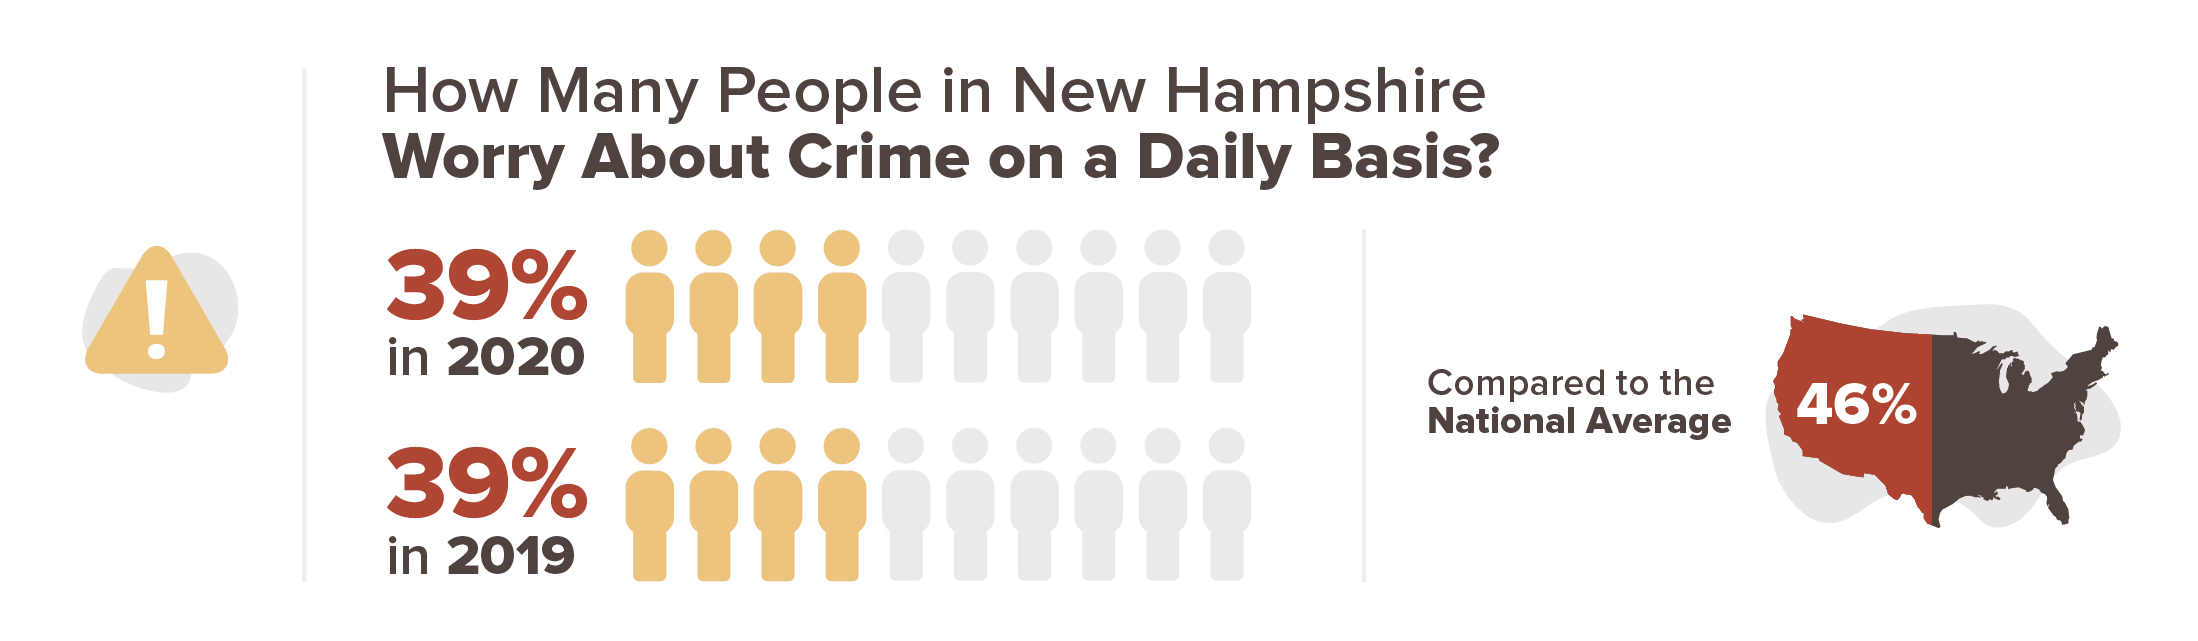 New Hampshire crime concern infographic